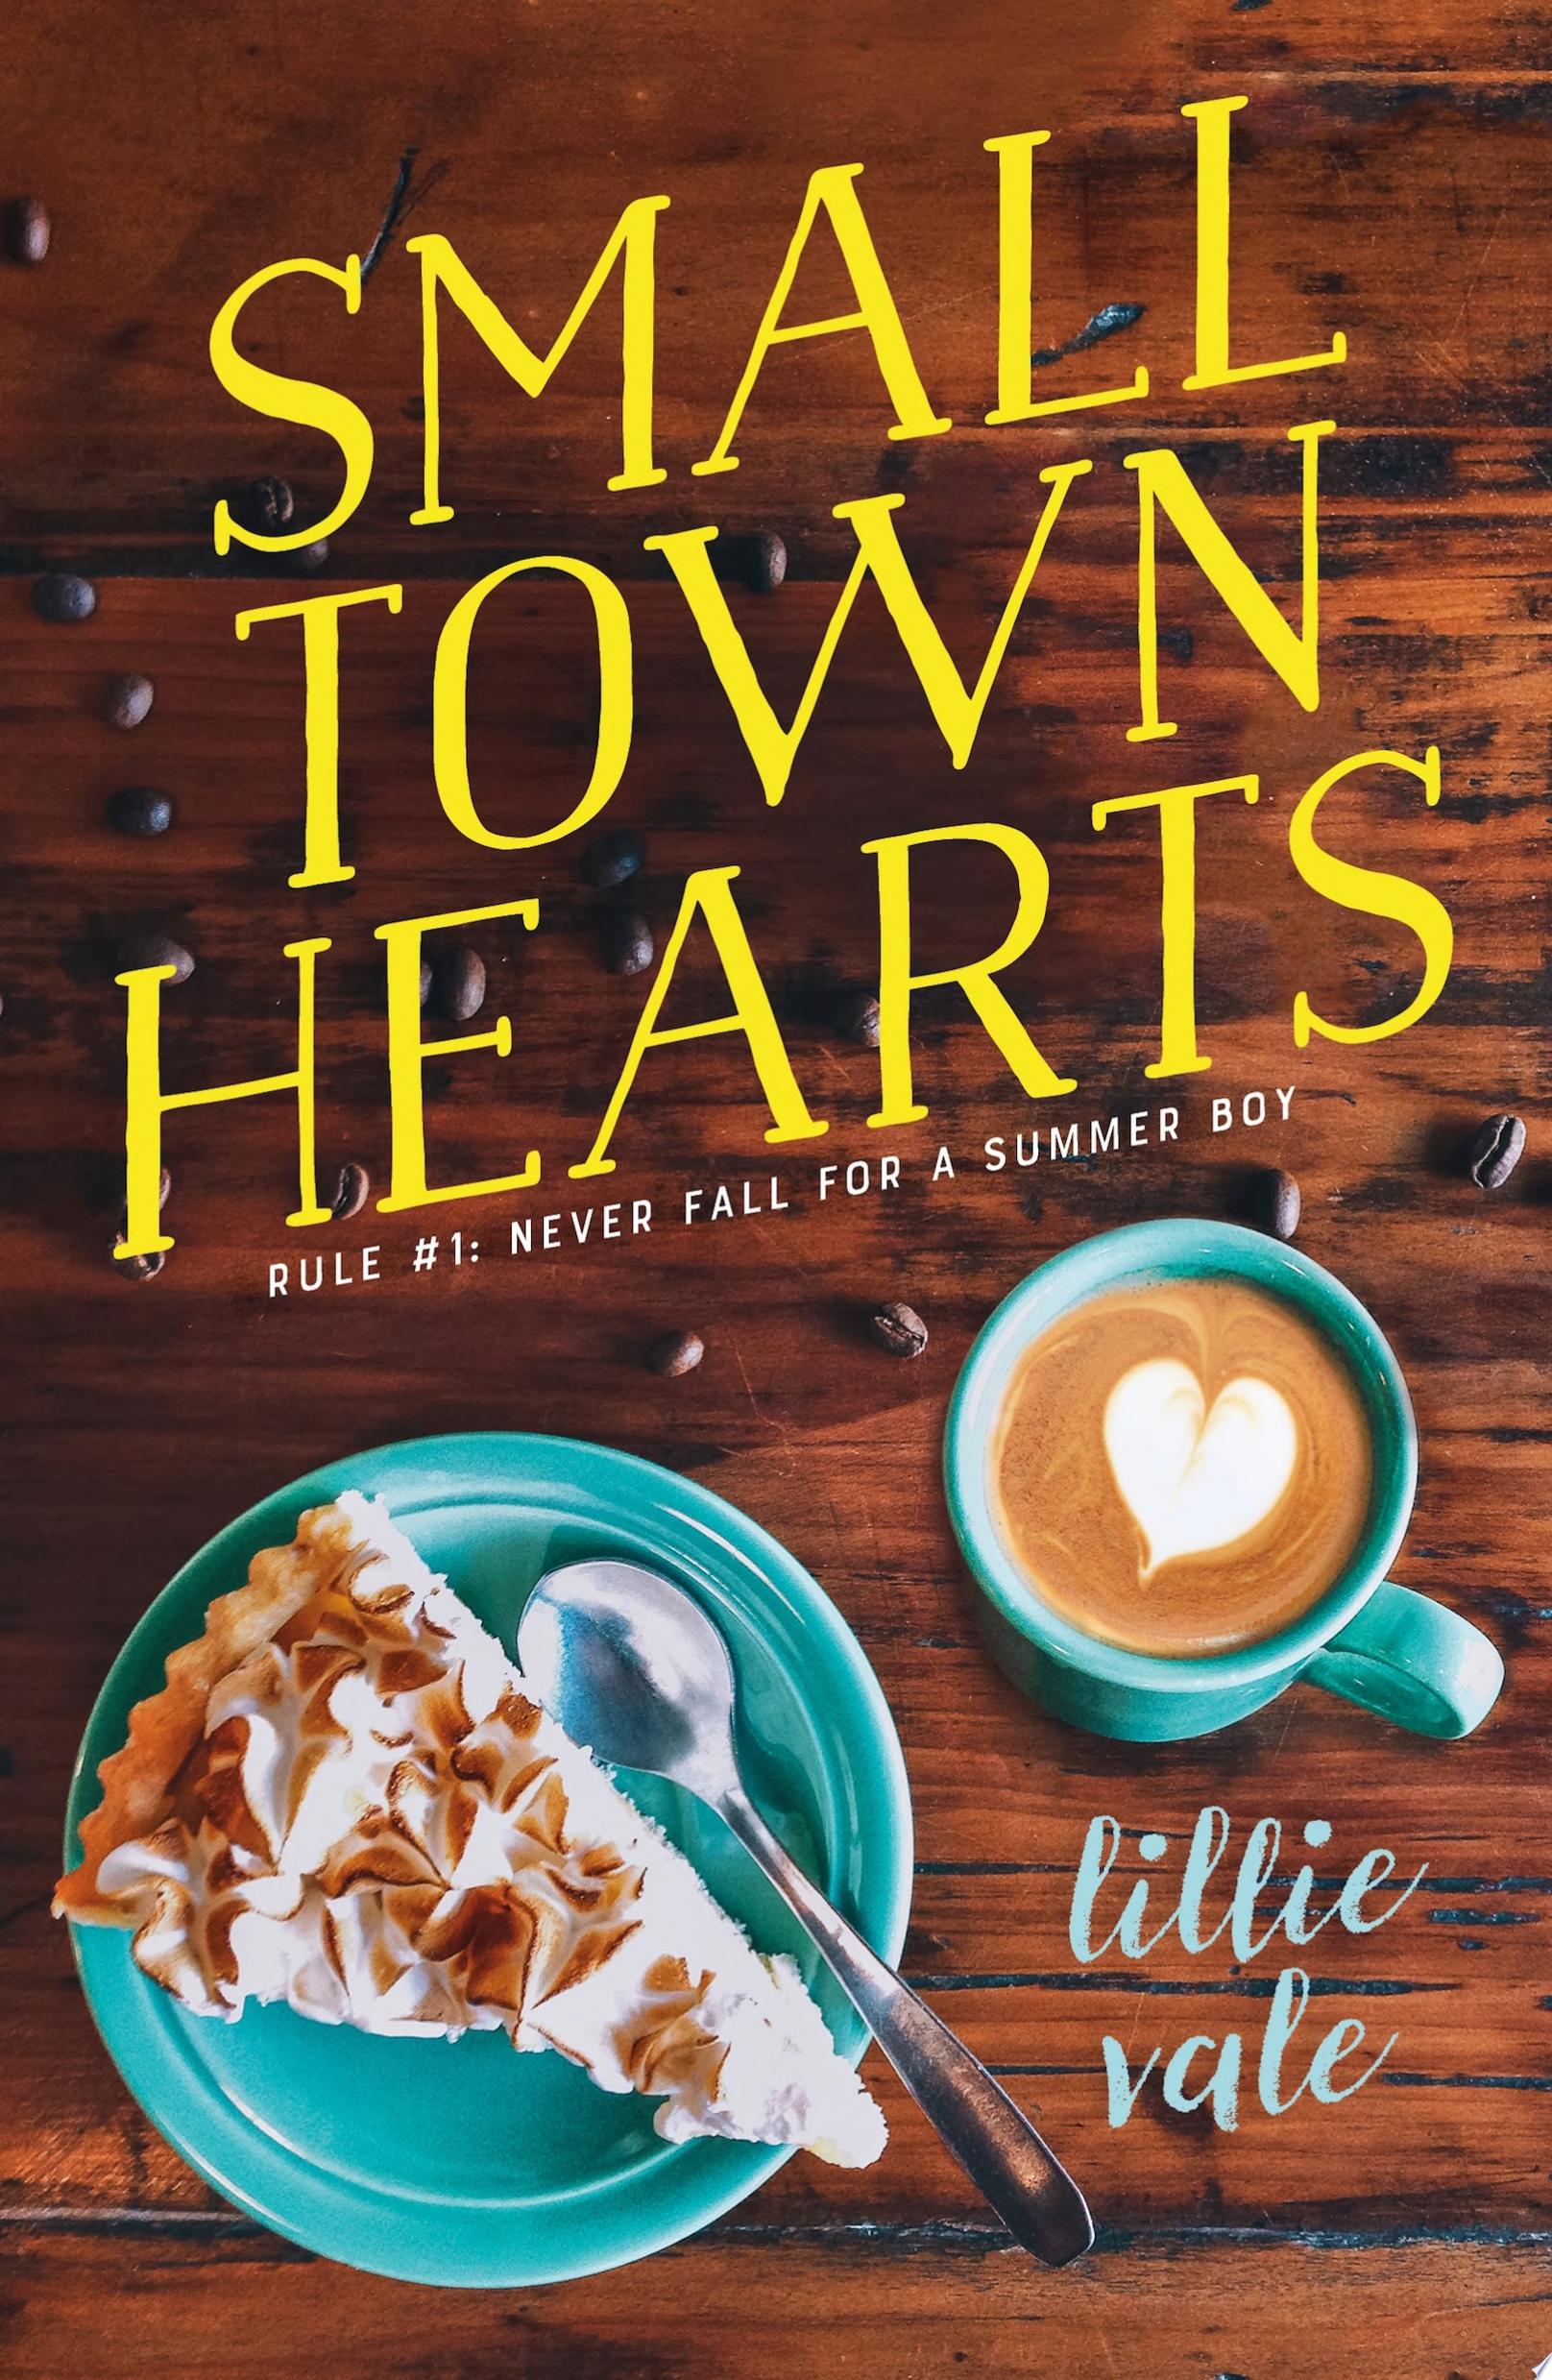 Image for "Small Town Hearts"